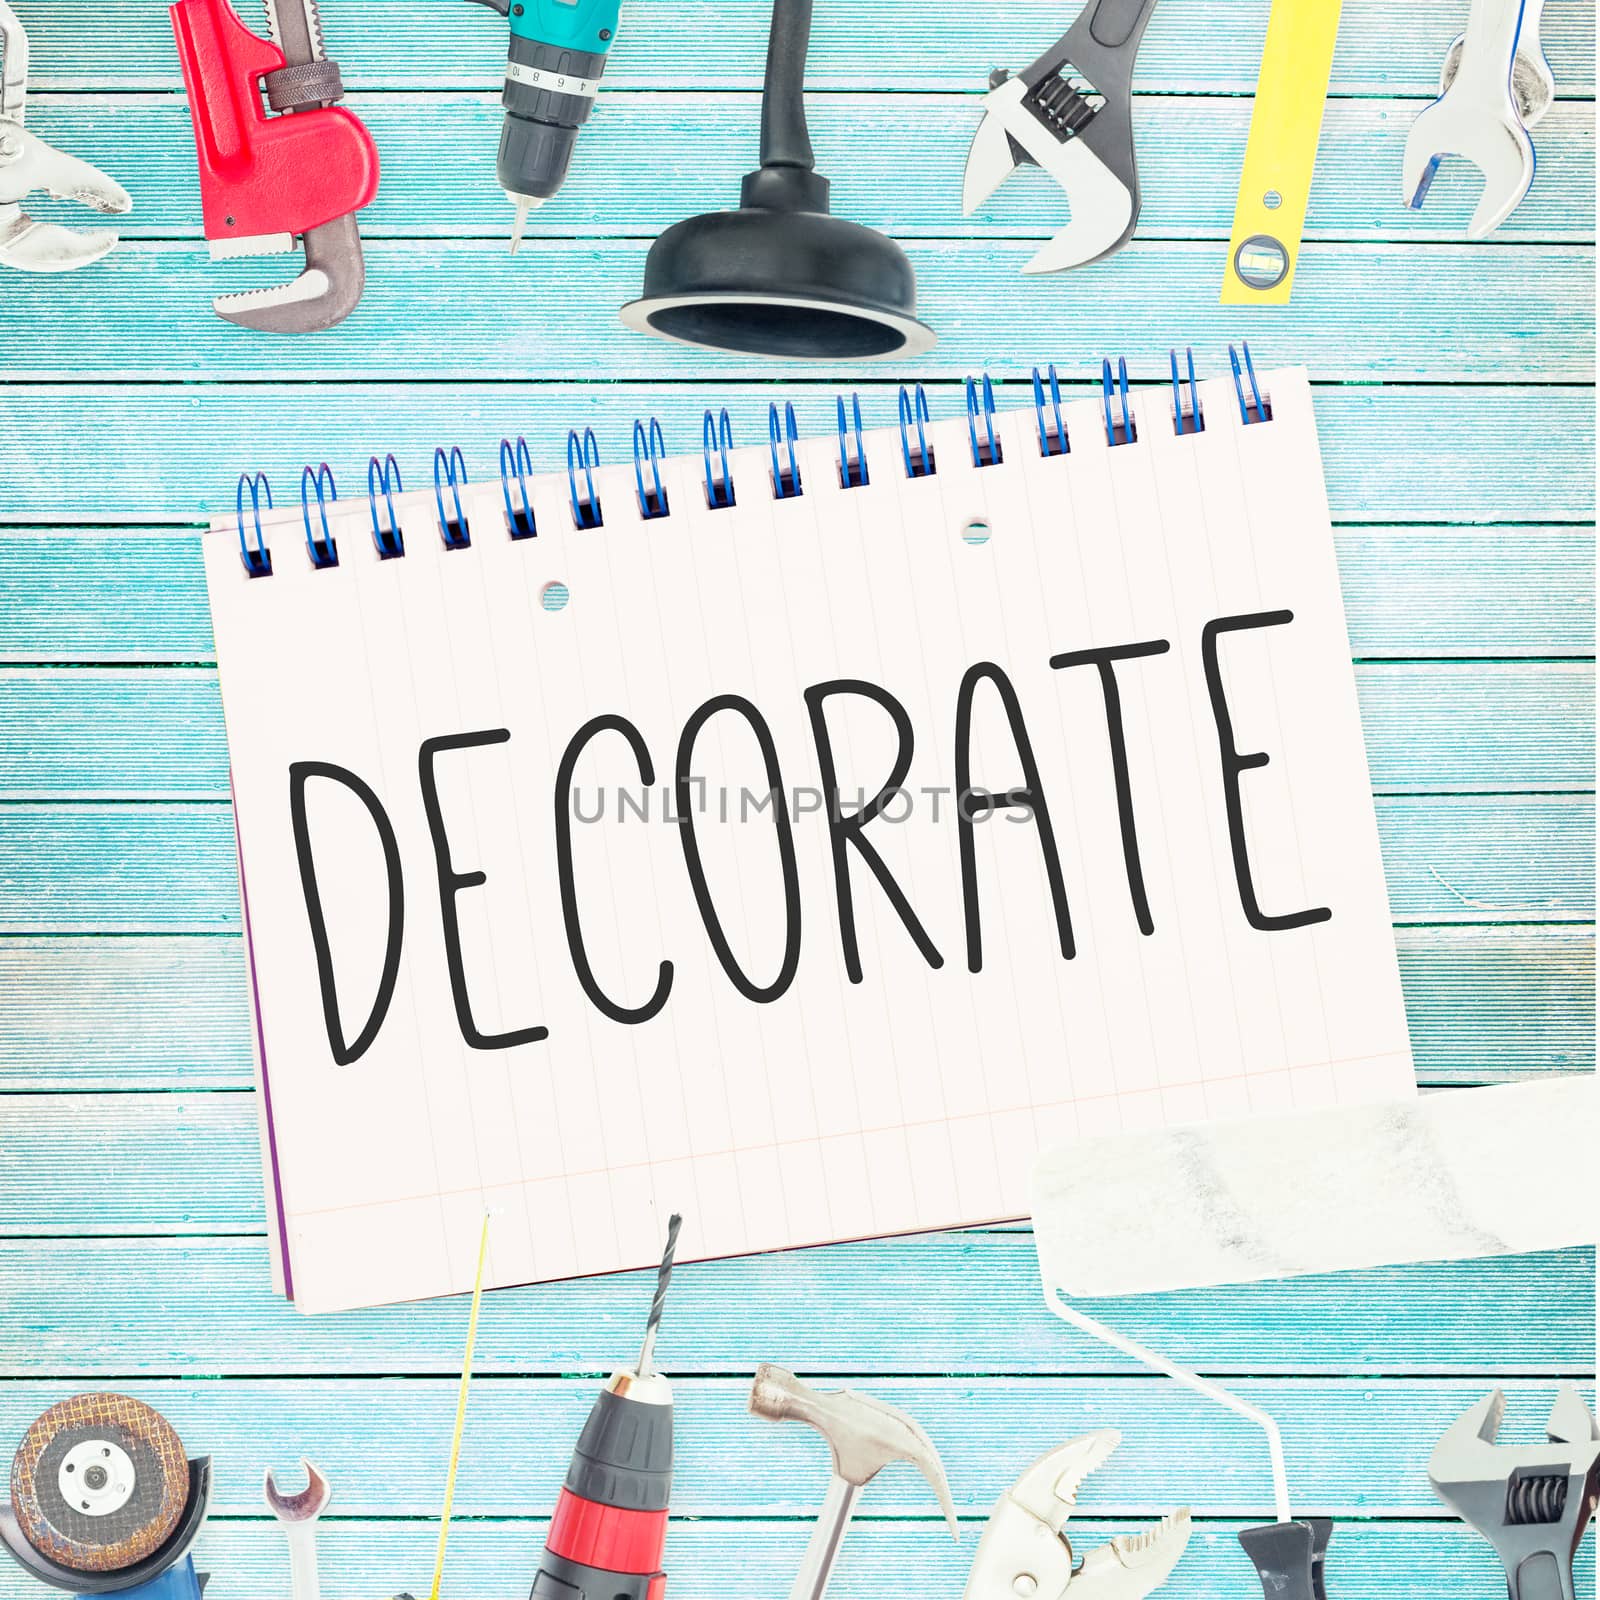 The word decorate  against tools and notepad on wooden background